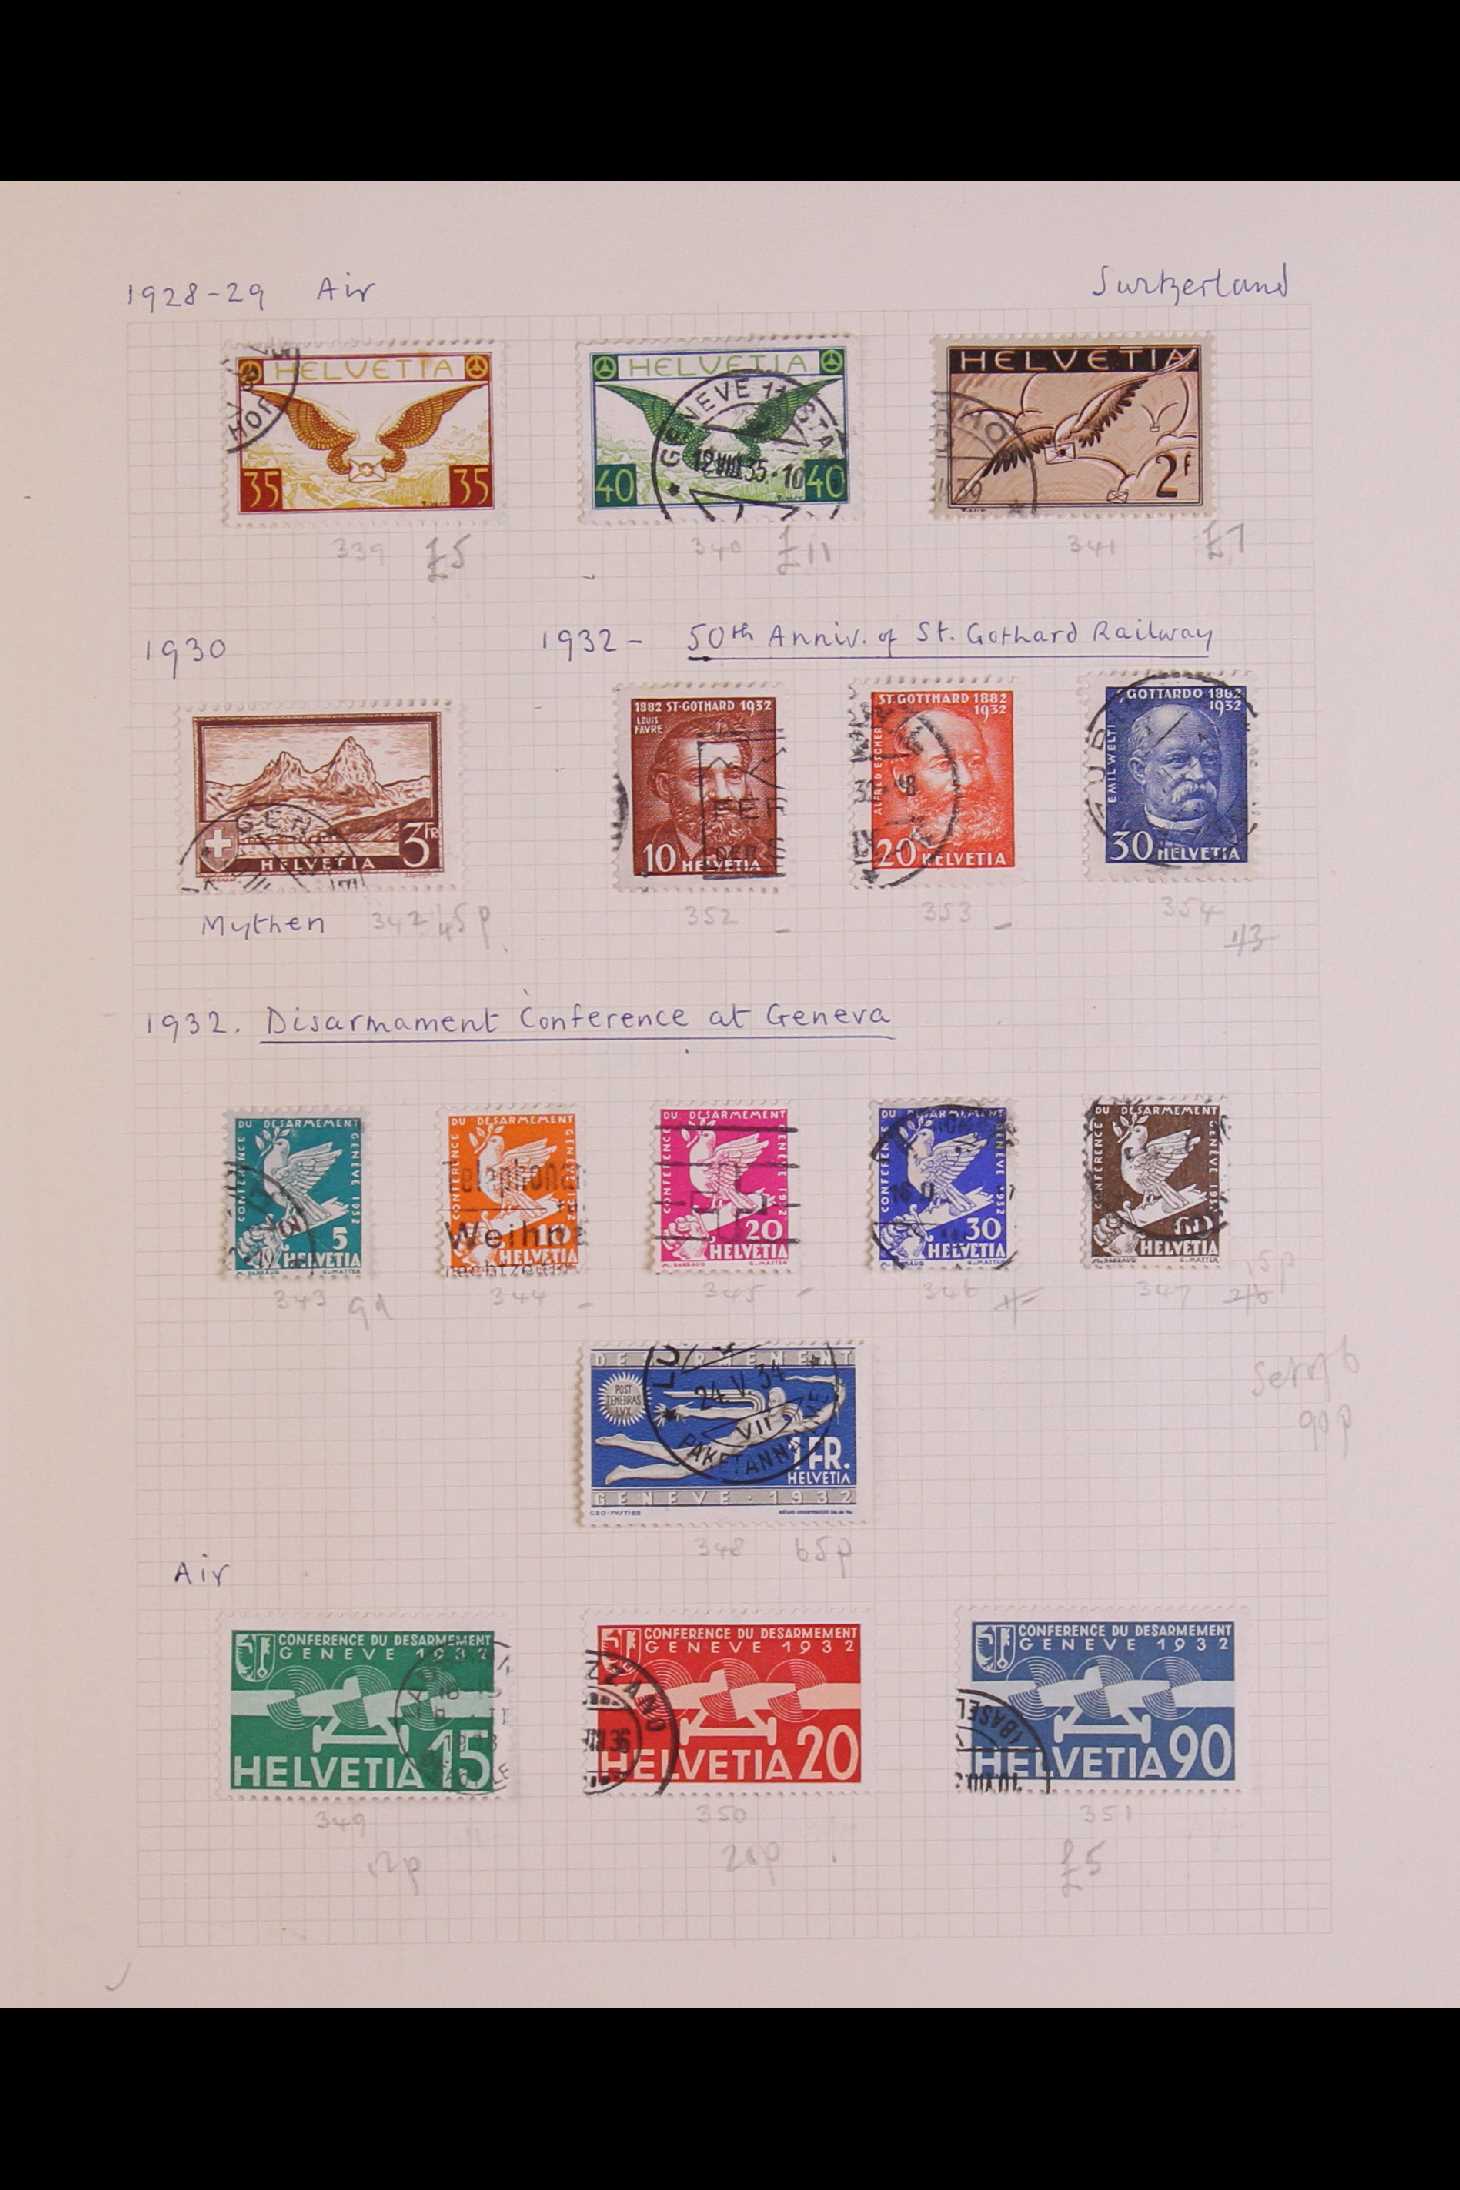 SWITZERLAND 1850 - 1959 COLLECTION of chiefly used stamps on leaves, incl 1850 5r & 10r, 1851 5r, - Image 9 of 17